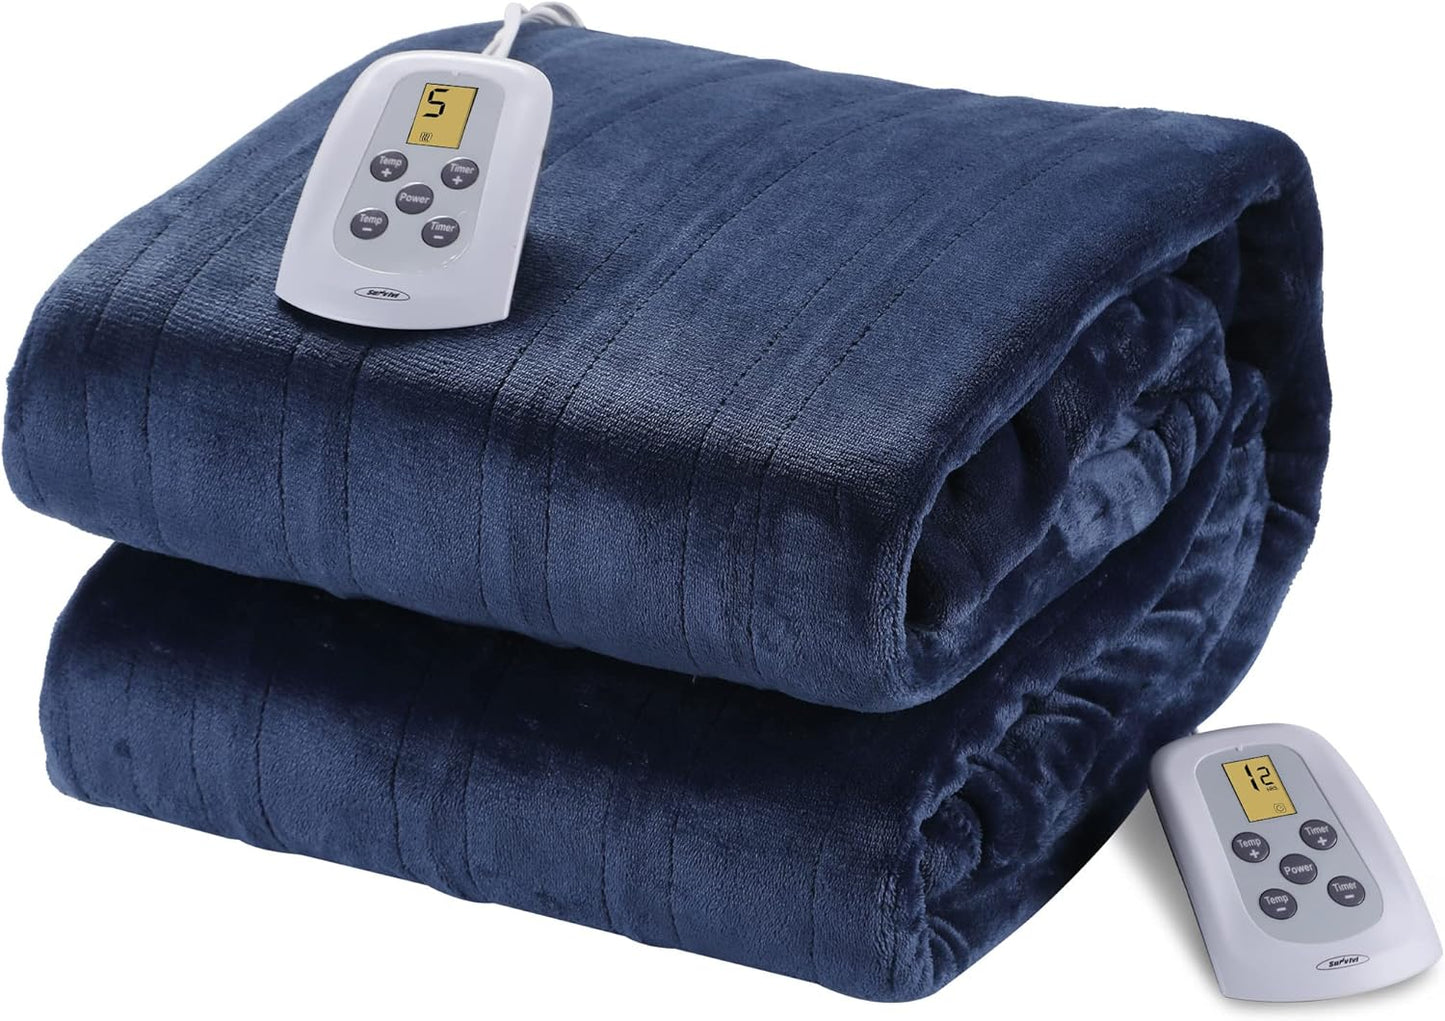 Sunvivi Electric Blanket King Size, Heated Blanket Dual Control Soft Flannel, 10 Heat Settings, 12 Hours Auto Off, Machine Washable, 5 Years Warranty, Overheat Protection, ETL Certified, Grey